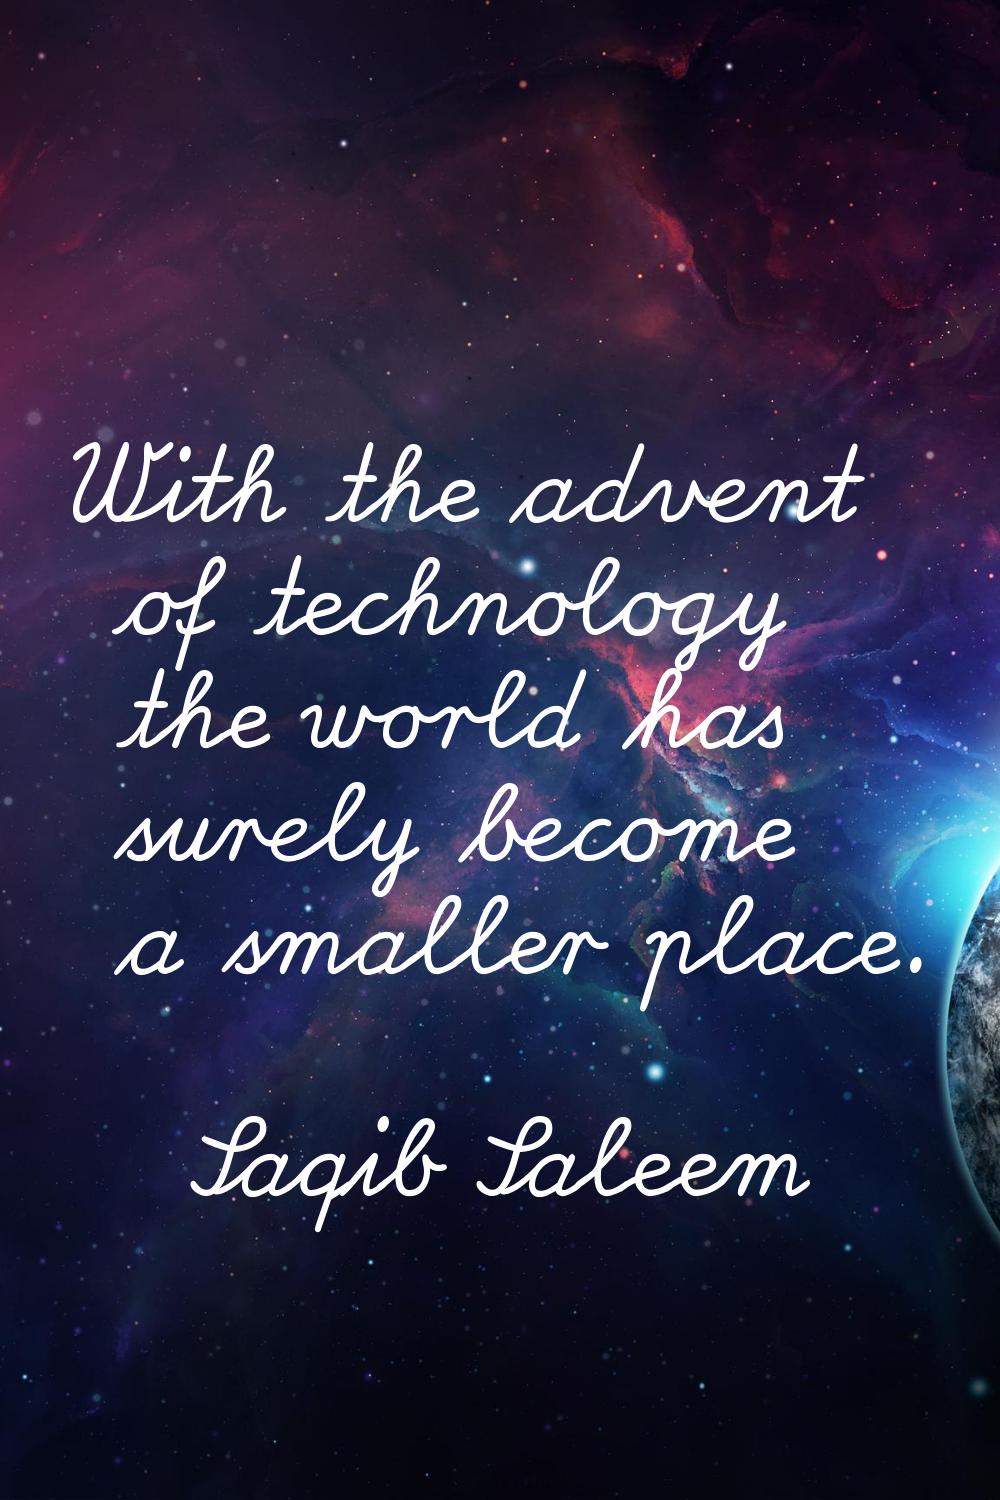 With the advent of technology the world has surely become a smaller place.